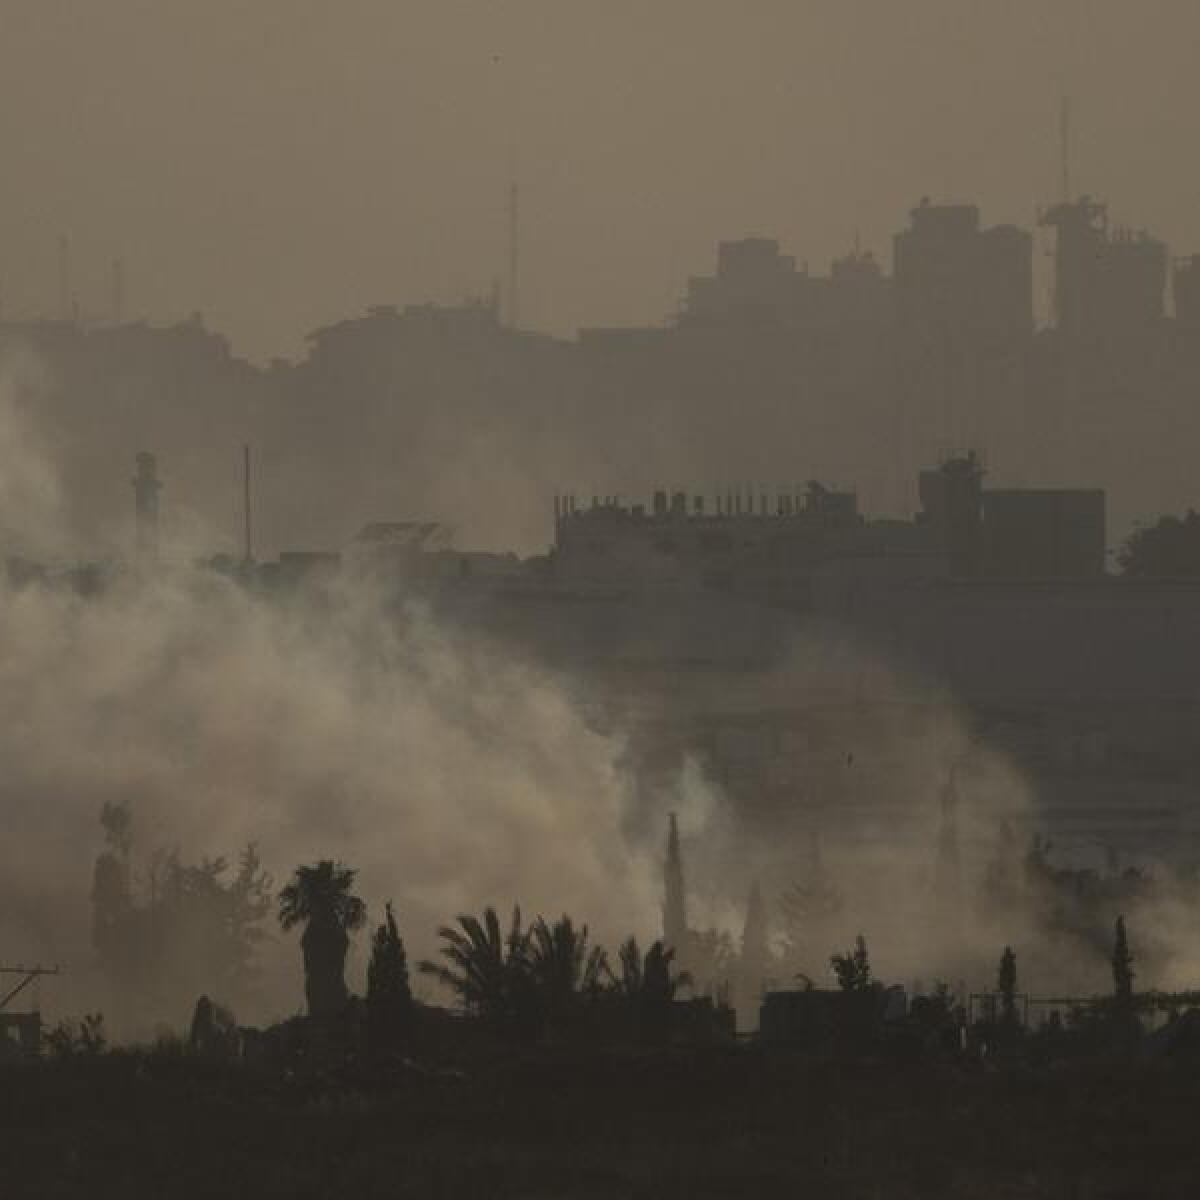 Israeli forces press Gaza offensive from north, south